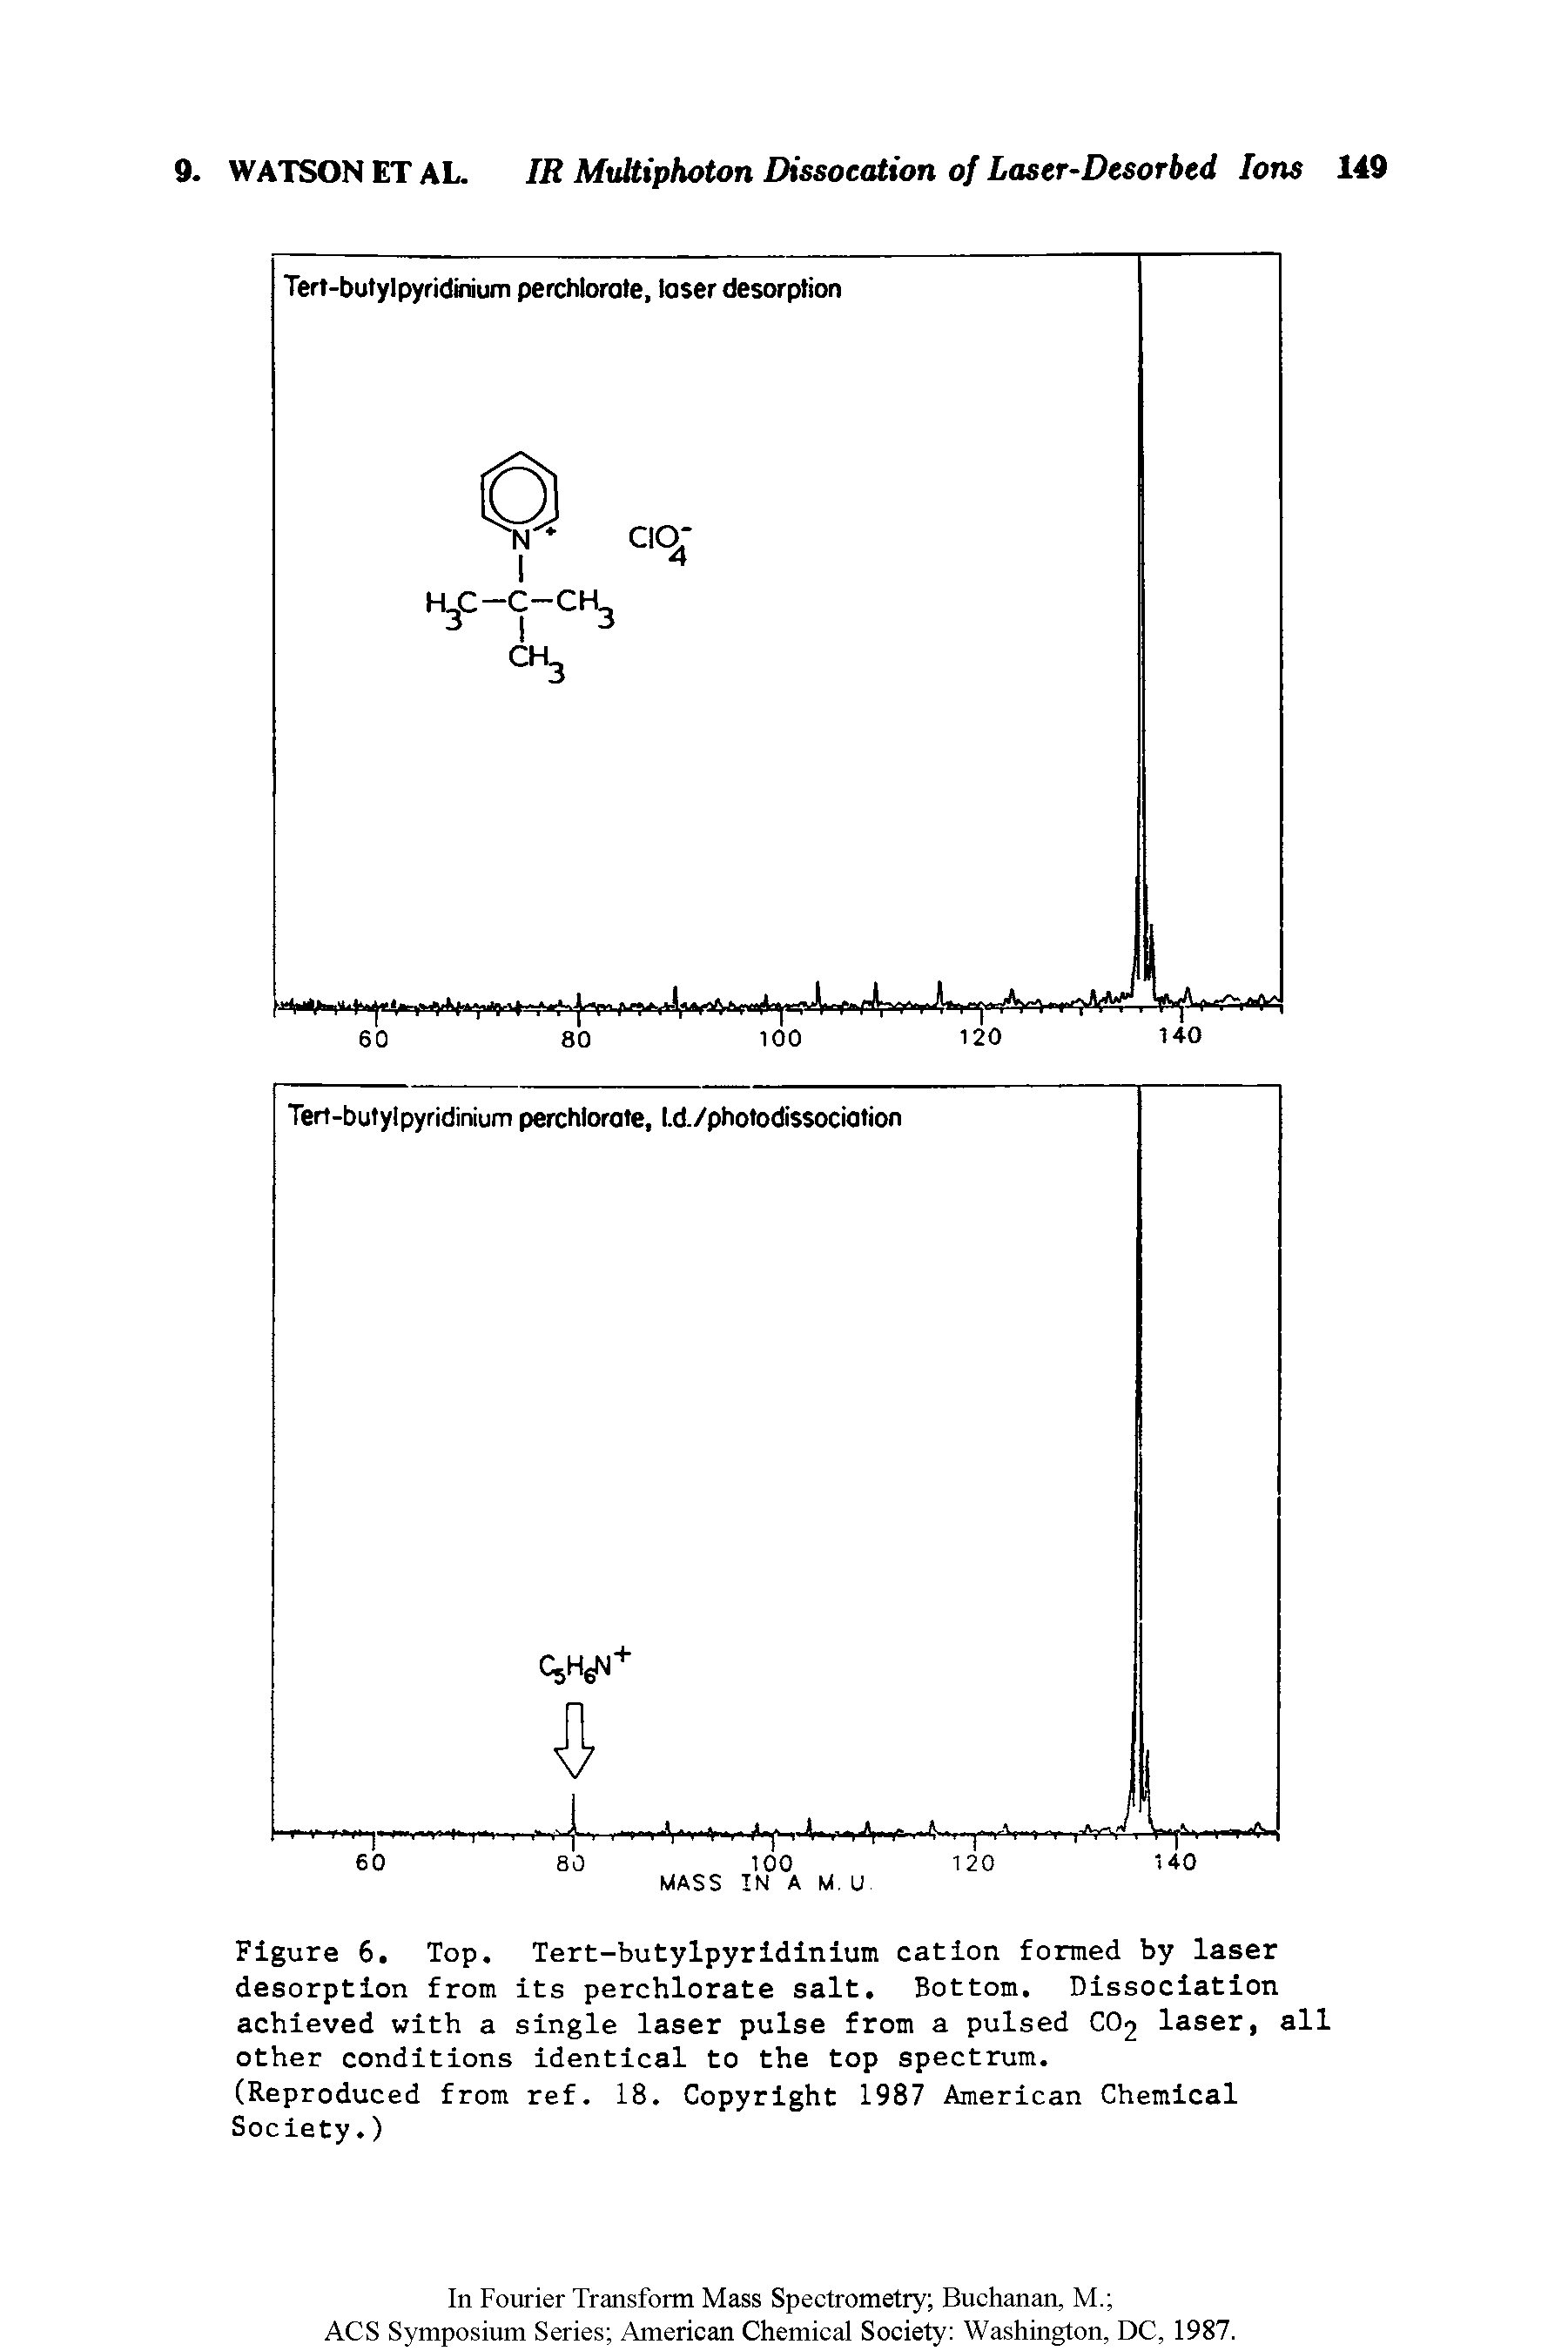 Figure 6. Top. Tert-butylpyridinium cation formed by laser desorption from its perchlorate salt. Bottom. Dissociation achieved with a single laser pulse from a pulsed CO2 laser, all other conditions identical to the top spectrum.